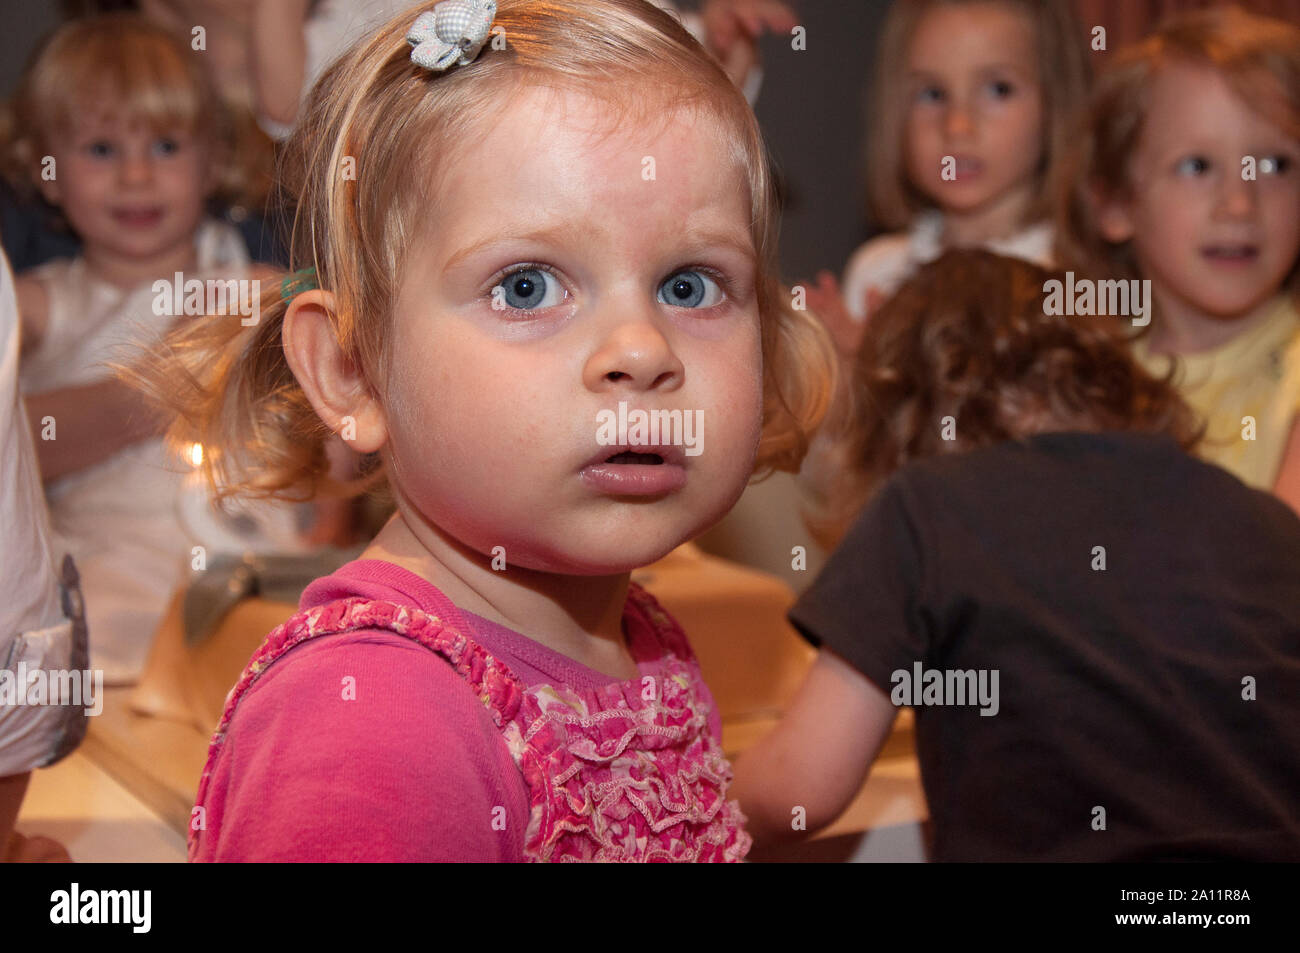 Candid authentic close up portrait of an adorable cute three years of age old blonde hair little girl with blue eyes at a kid's party. Stock Photo